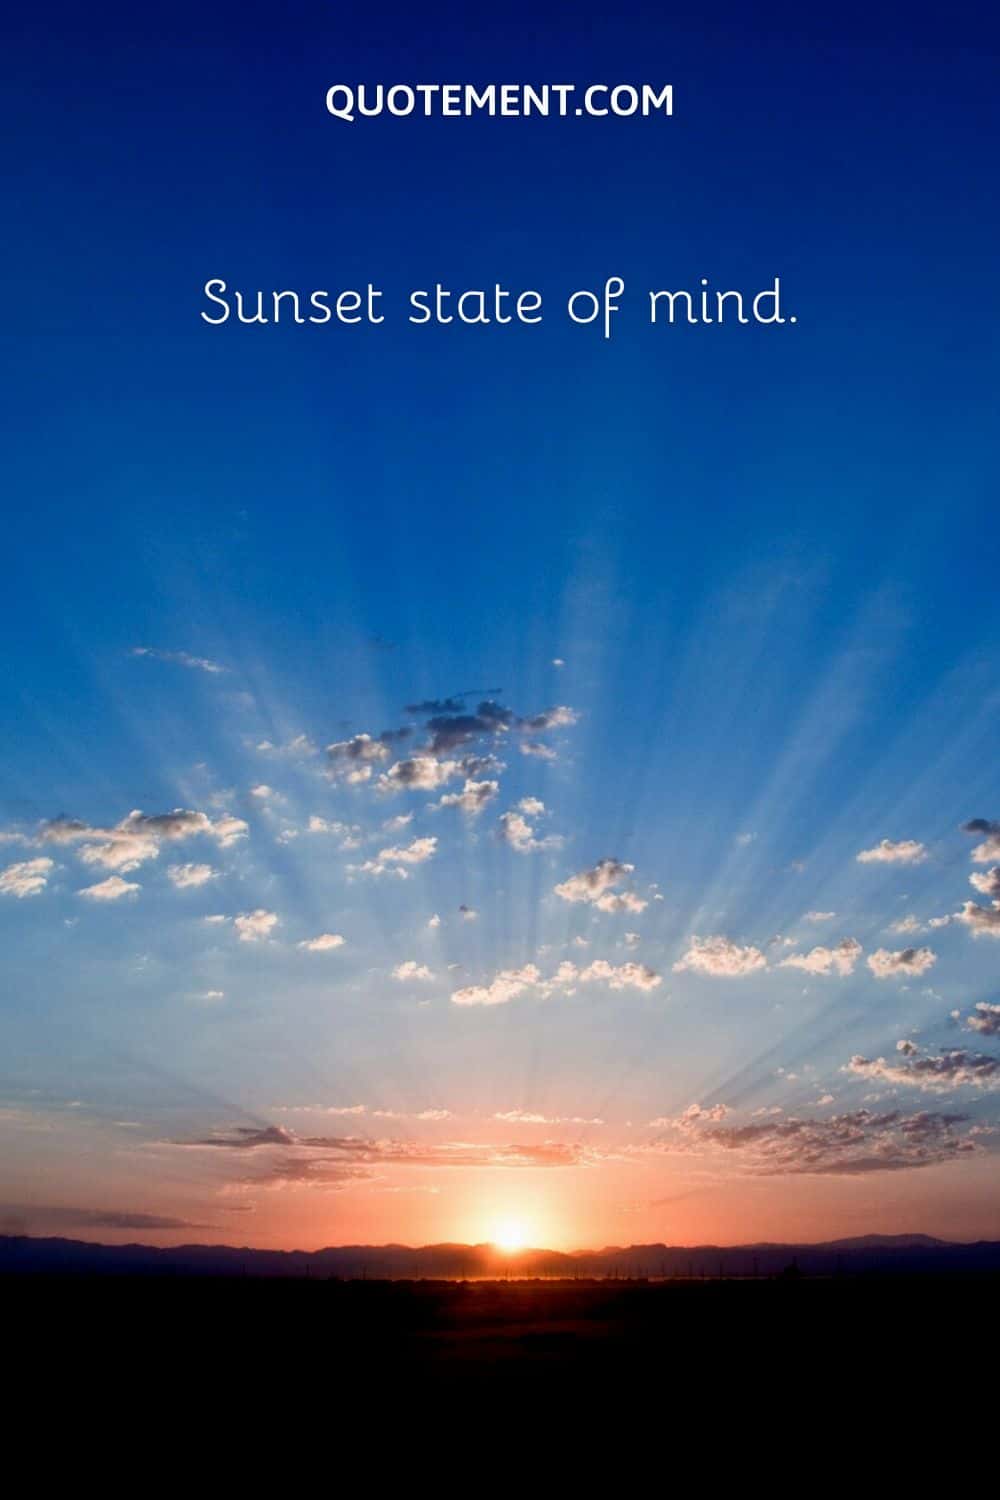 Sunset state of mind.